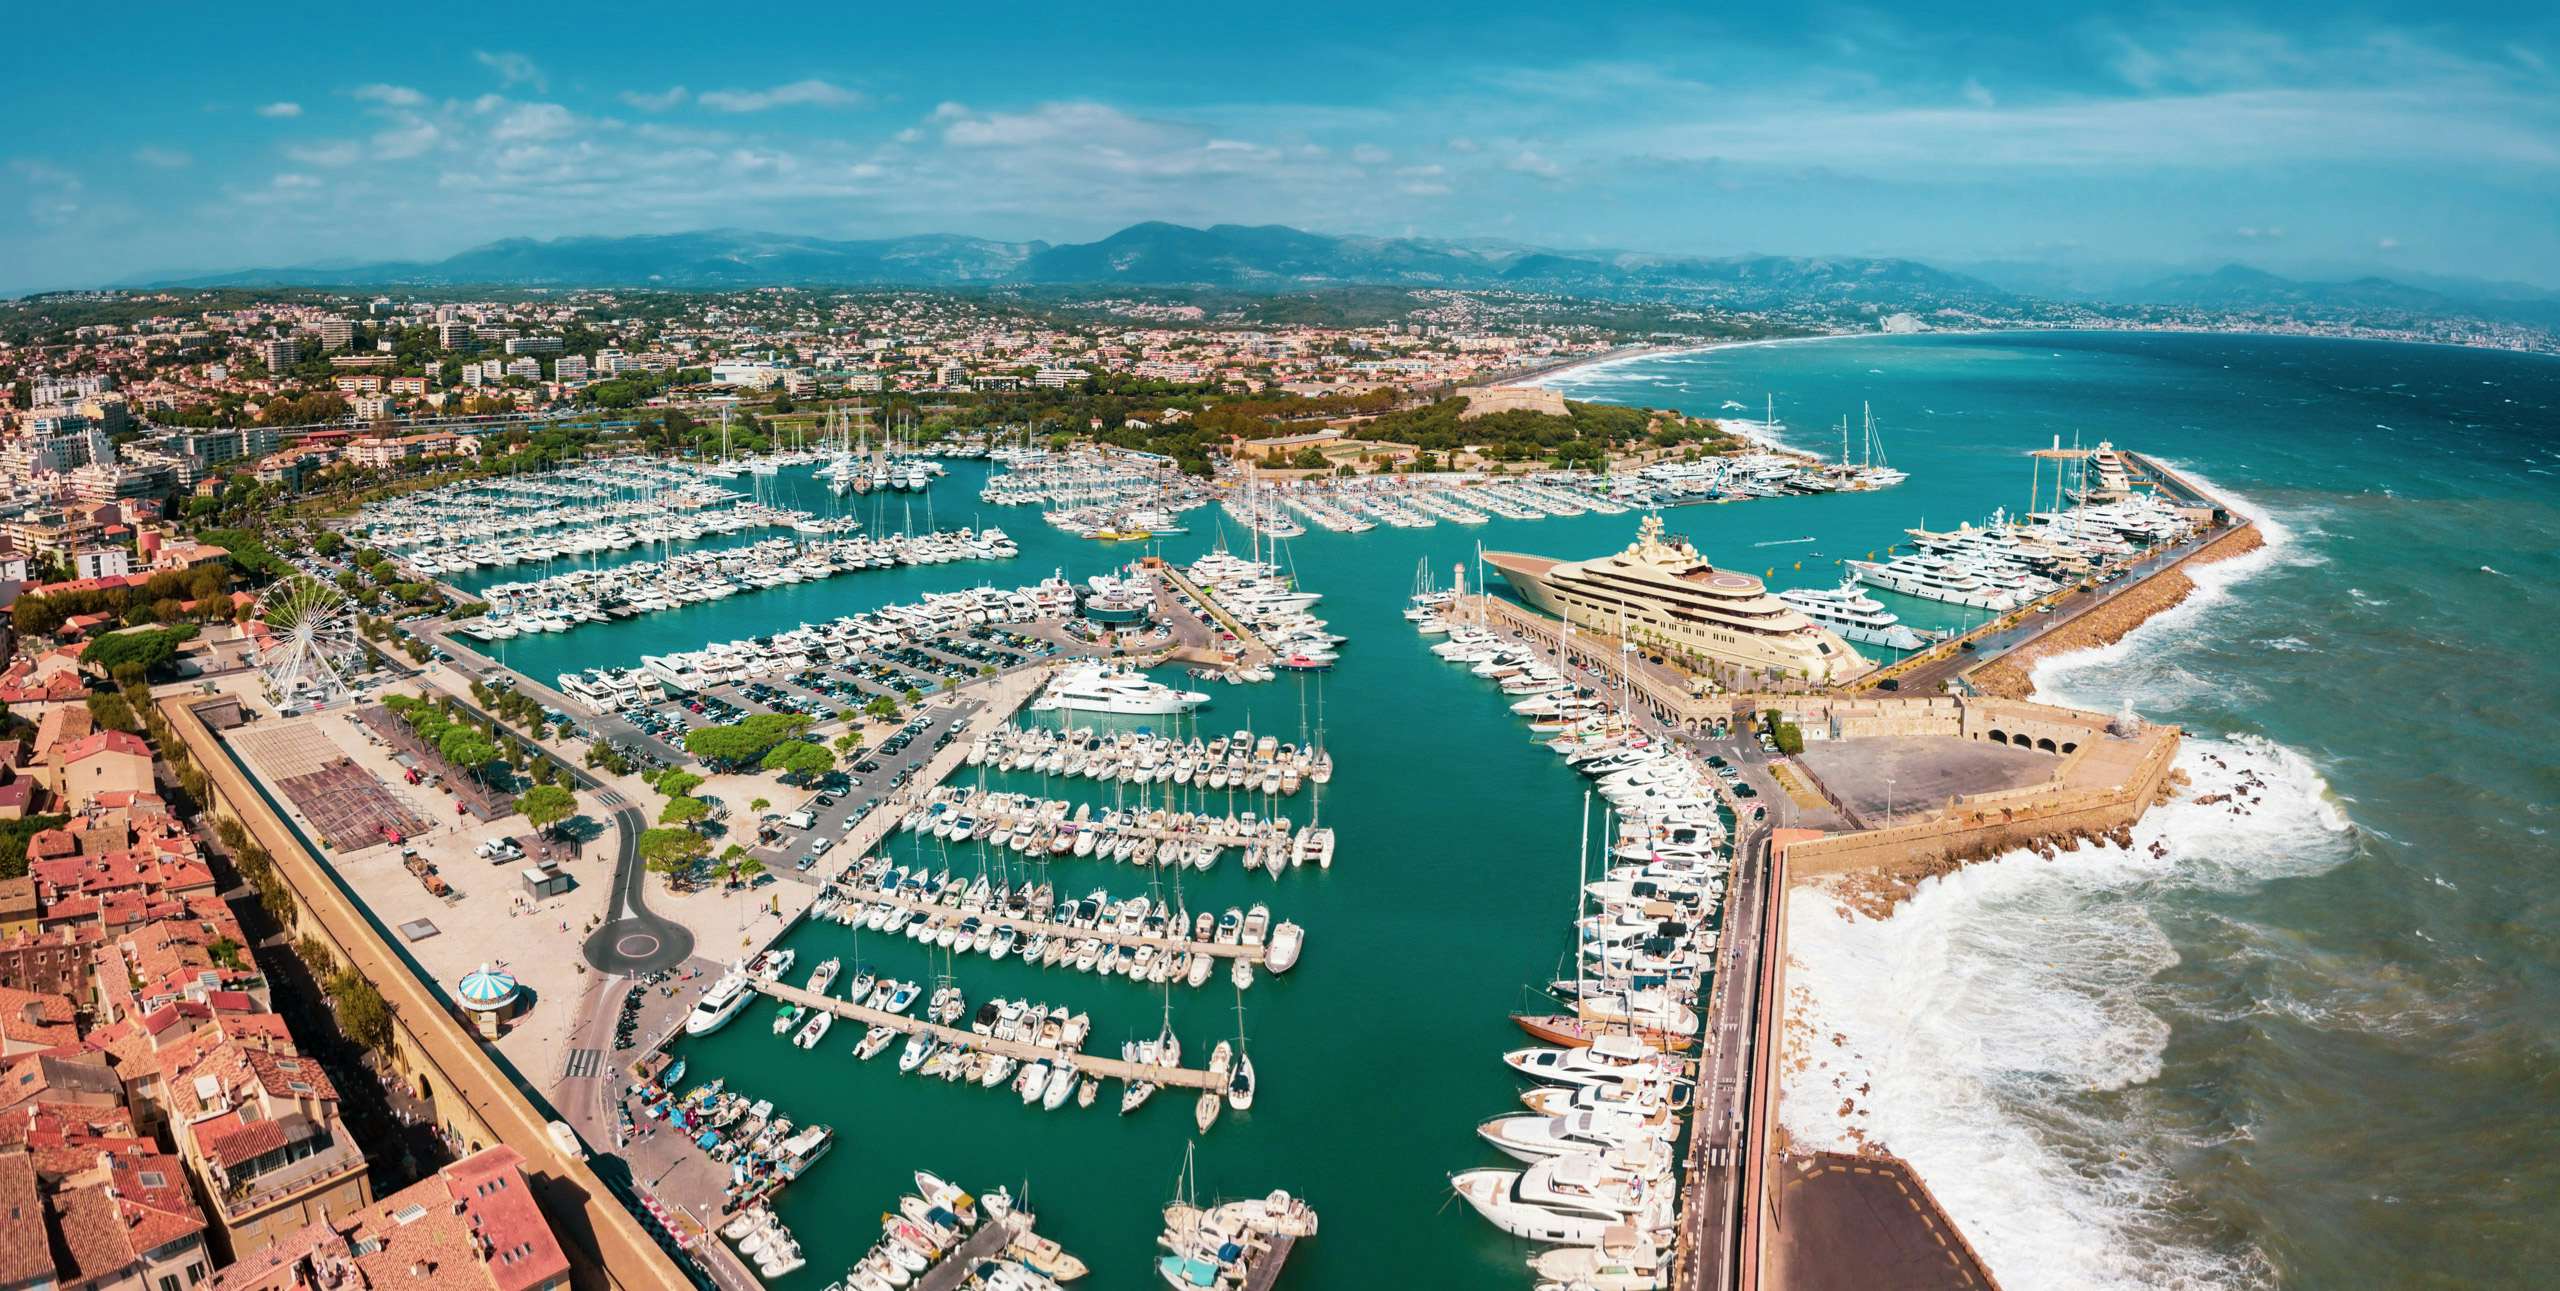 yachting agencies in antibes